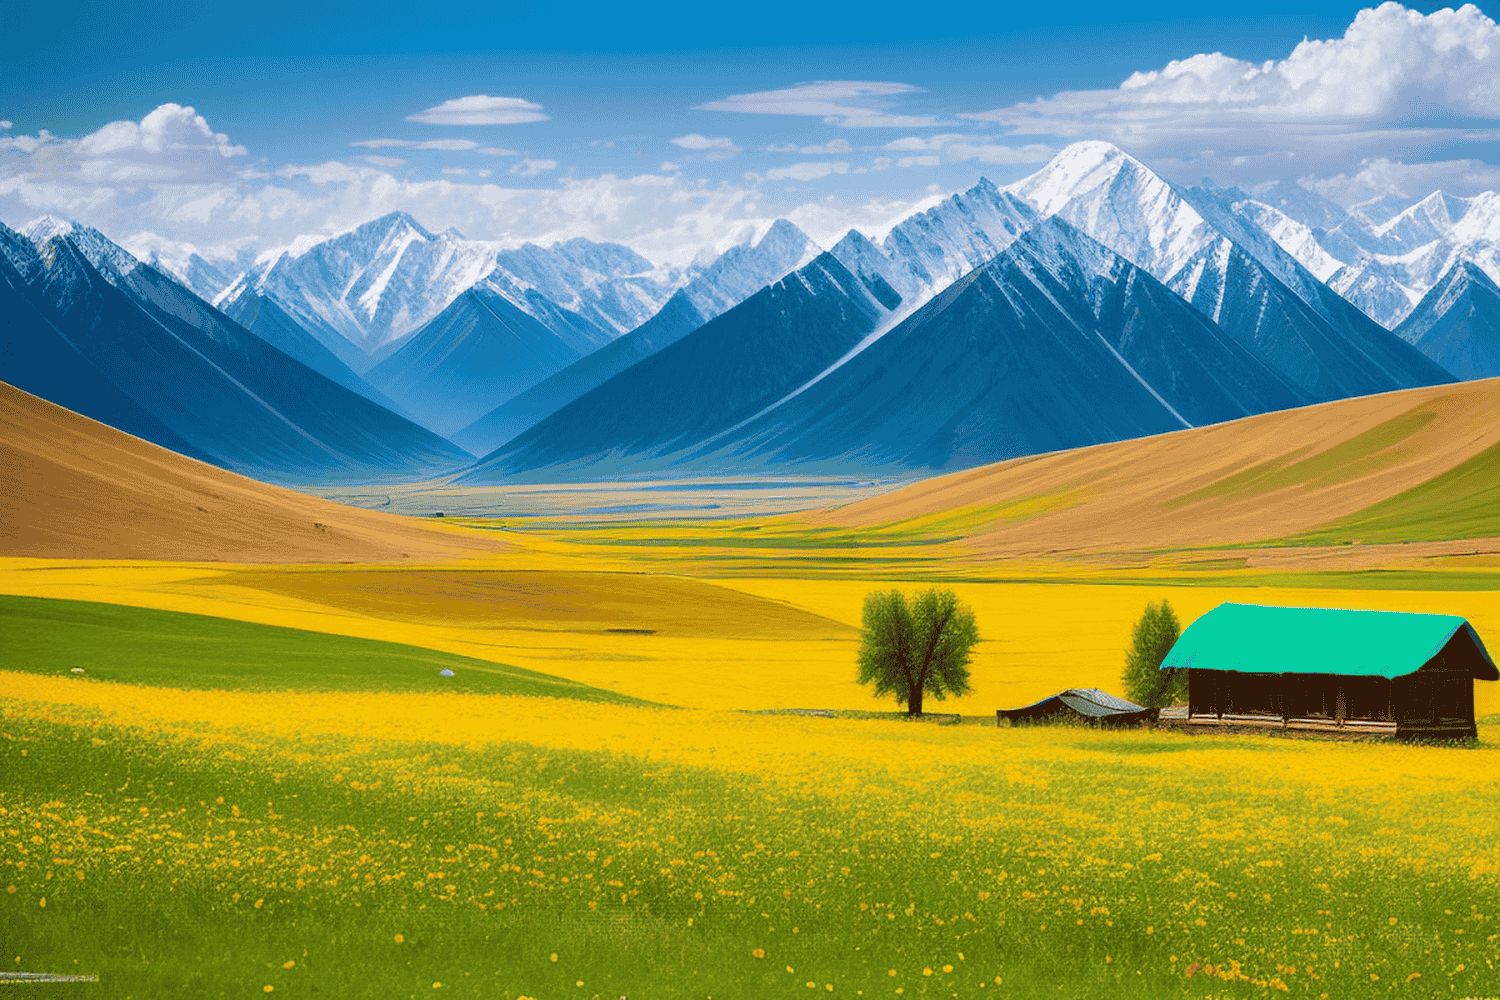 Information about Kyrgyzstan